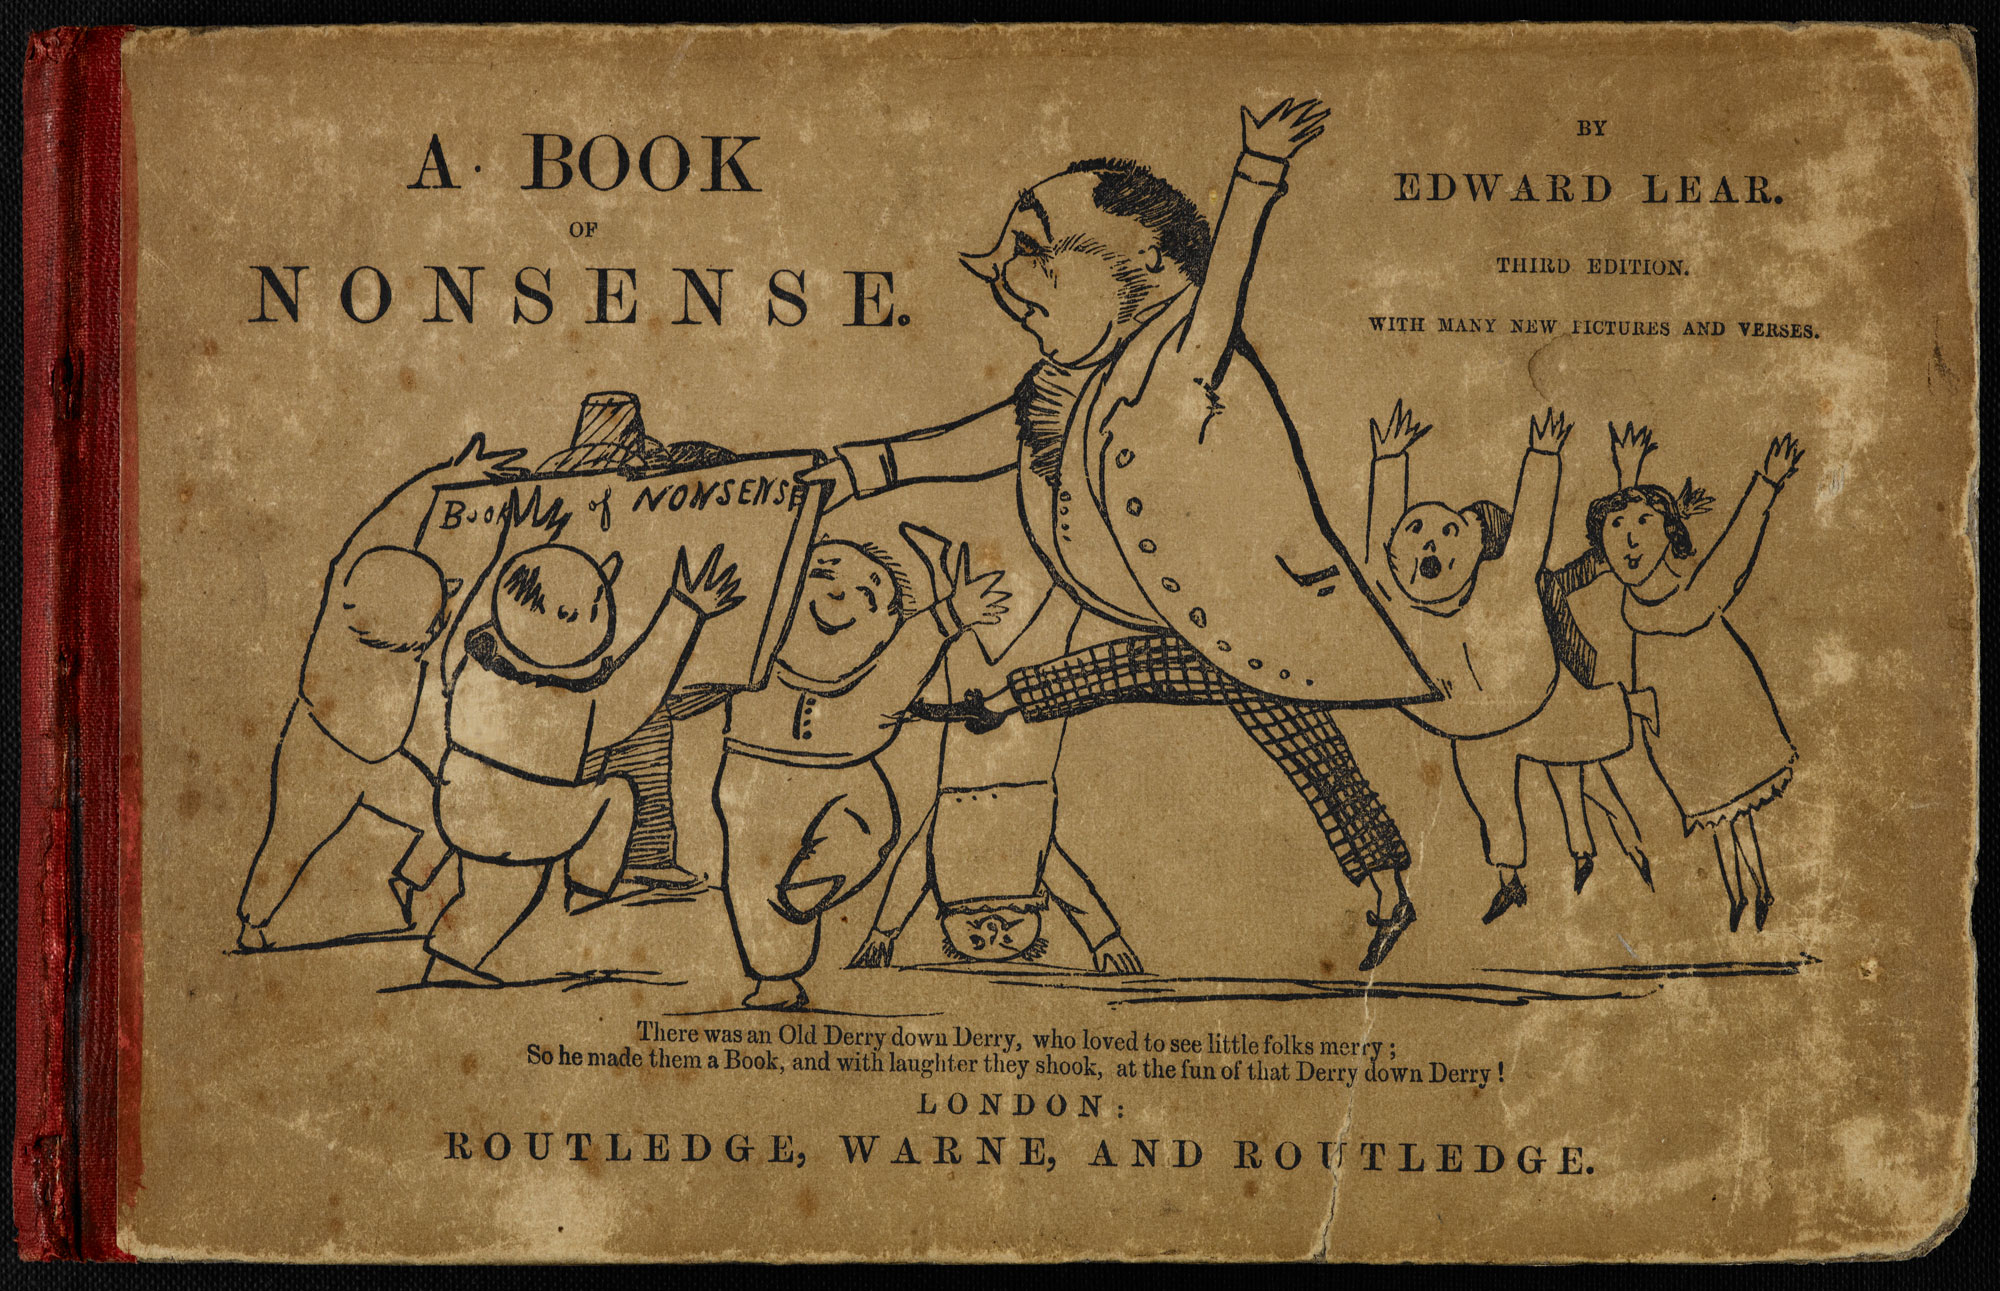 He all his books. A book of nonsense Edward Lear.